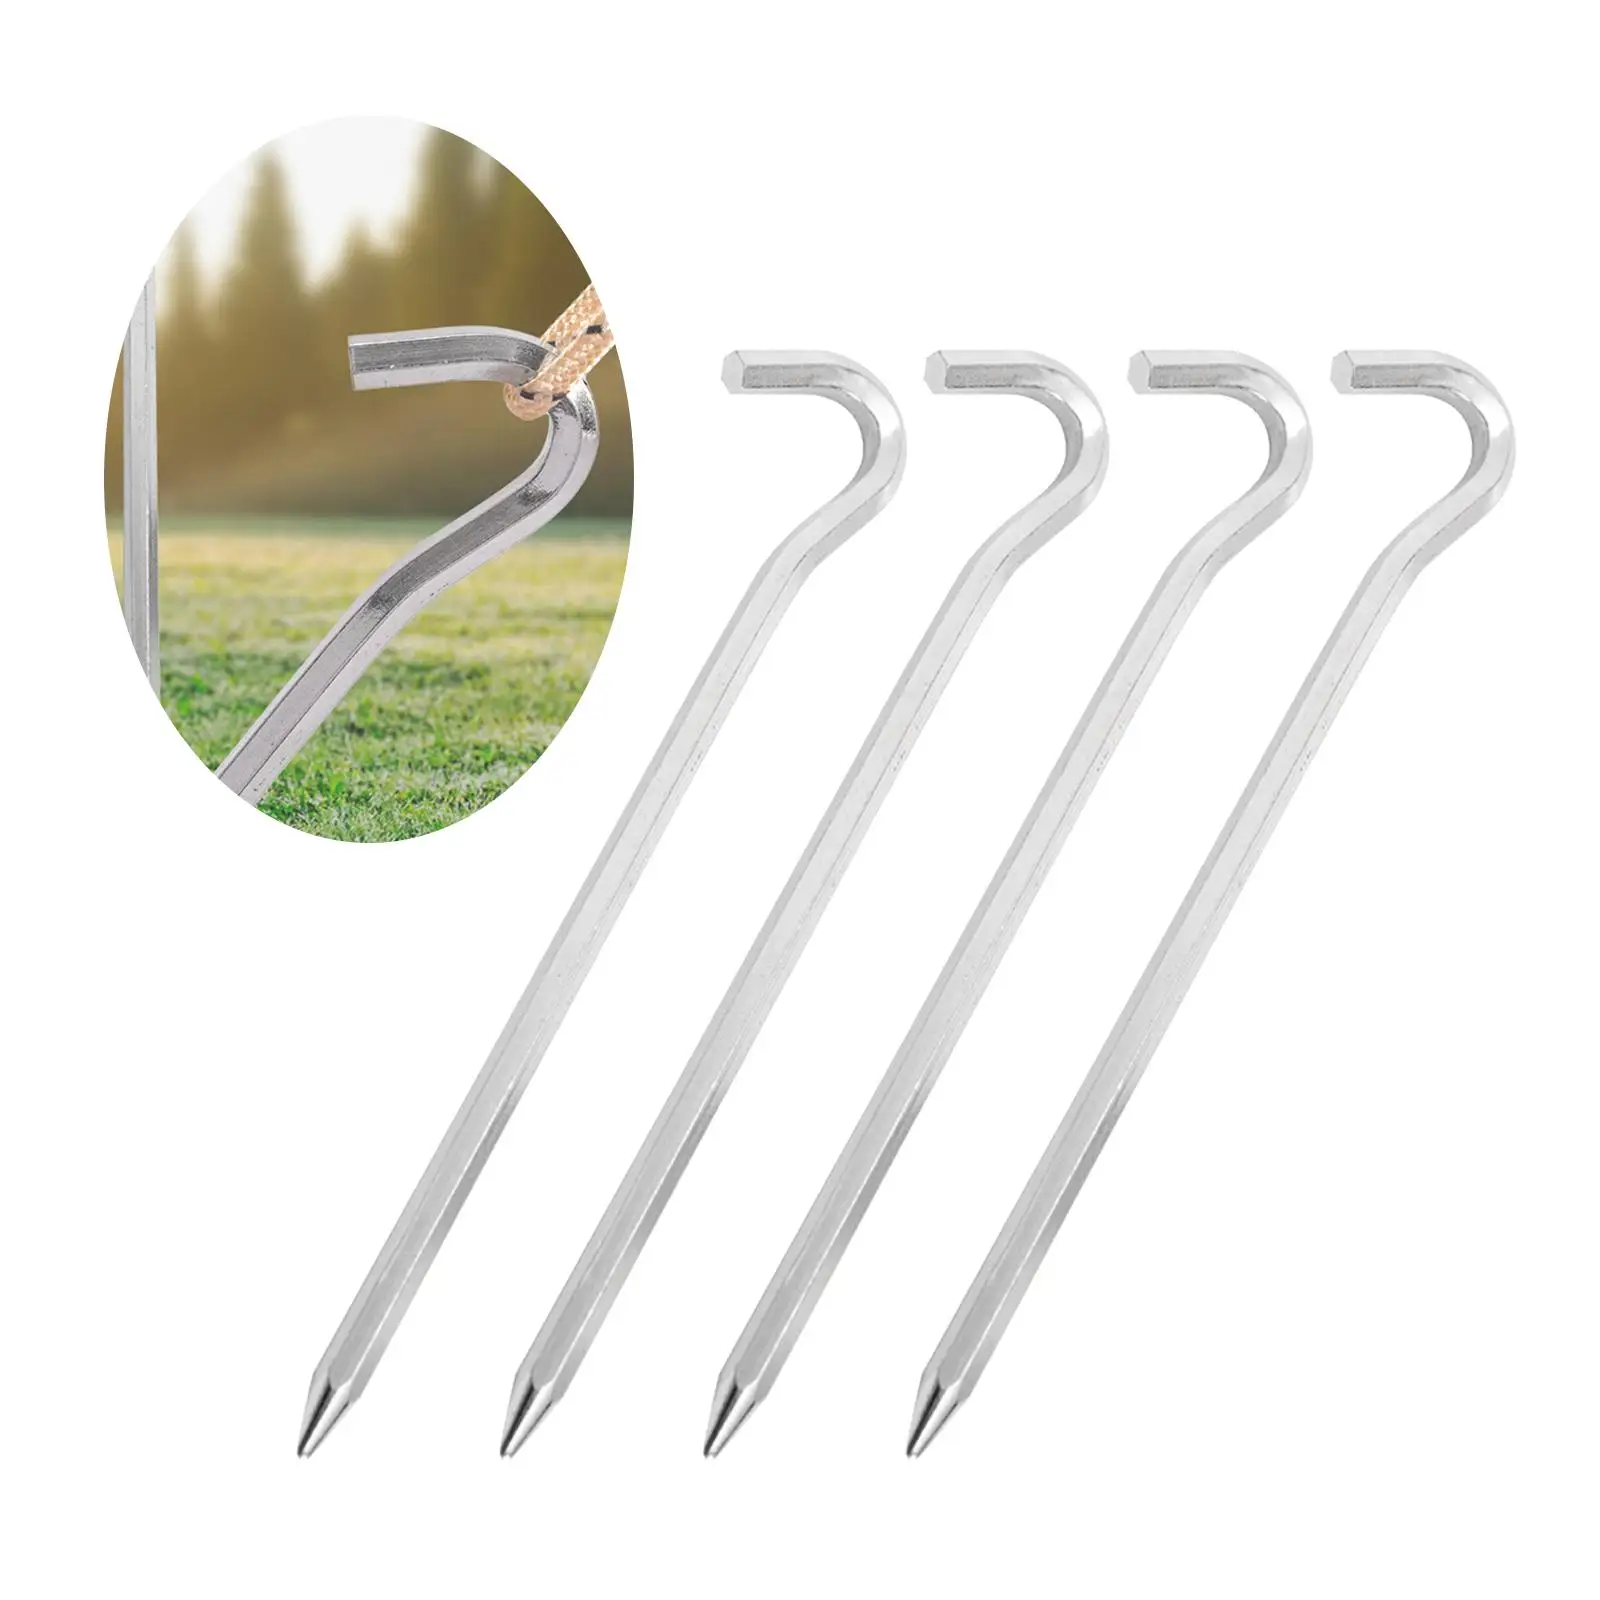 4Pcs Tent Pegs Garden Stakes Camping Tent Nails for Camping Awning Canopy